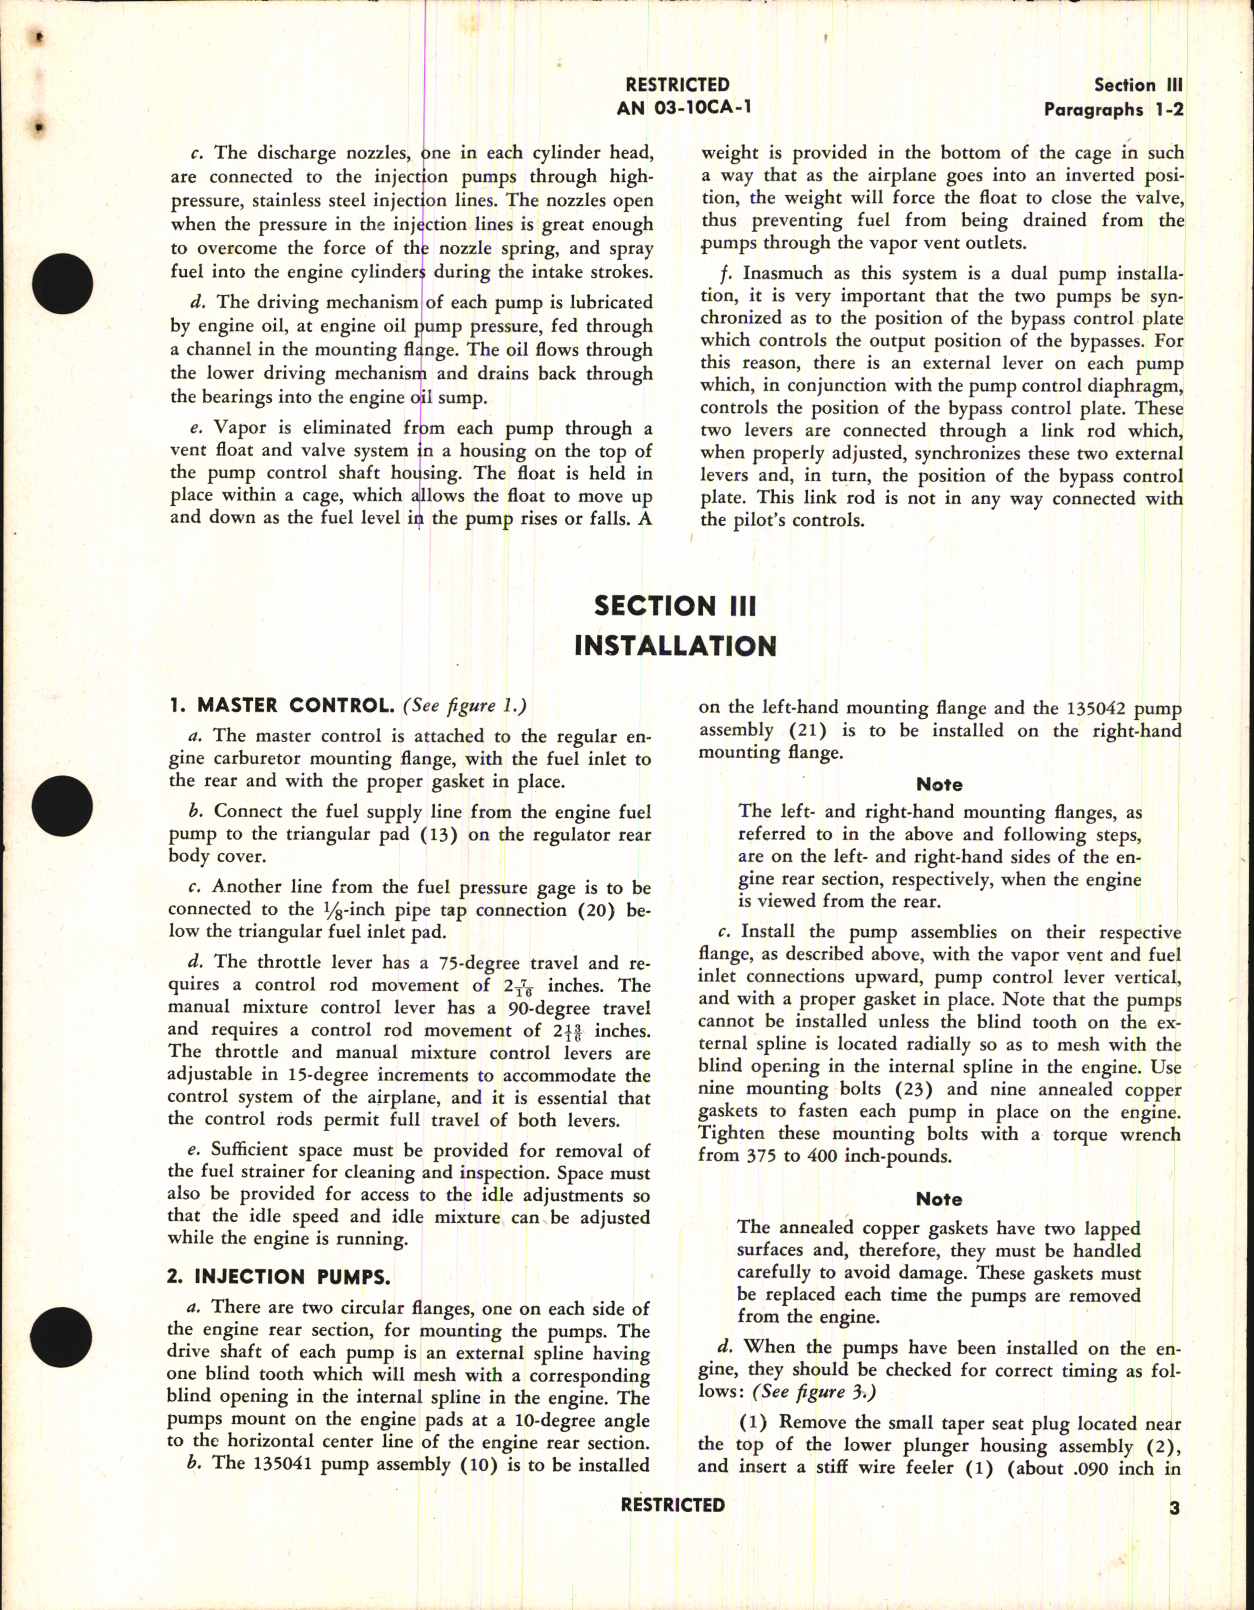 Sample page 7 from AirCorps Library document: Handbook of Instructions with Parts Catalog for Direct Fuel Injection System Model 58-18-A1A